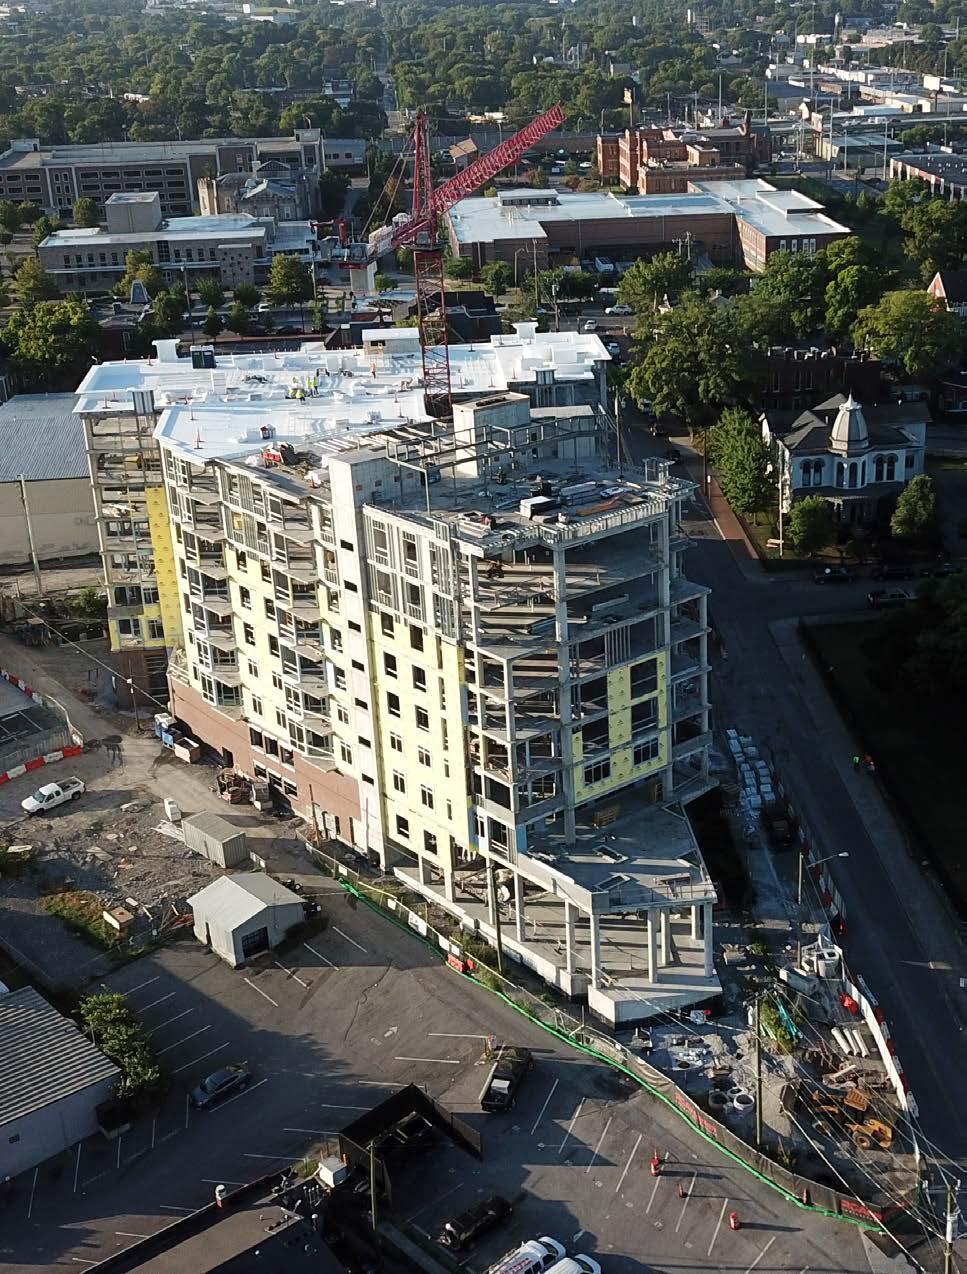 City Lights Overview: Scheduled for construction completion Q1 2019 is City Lights, a 71-unit luxury condominium project located in Nashville s SoBro district.